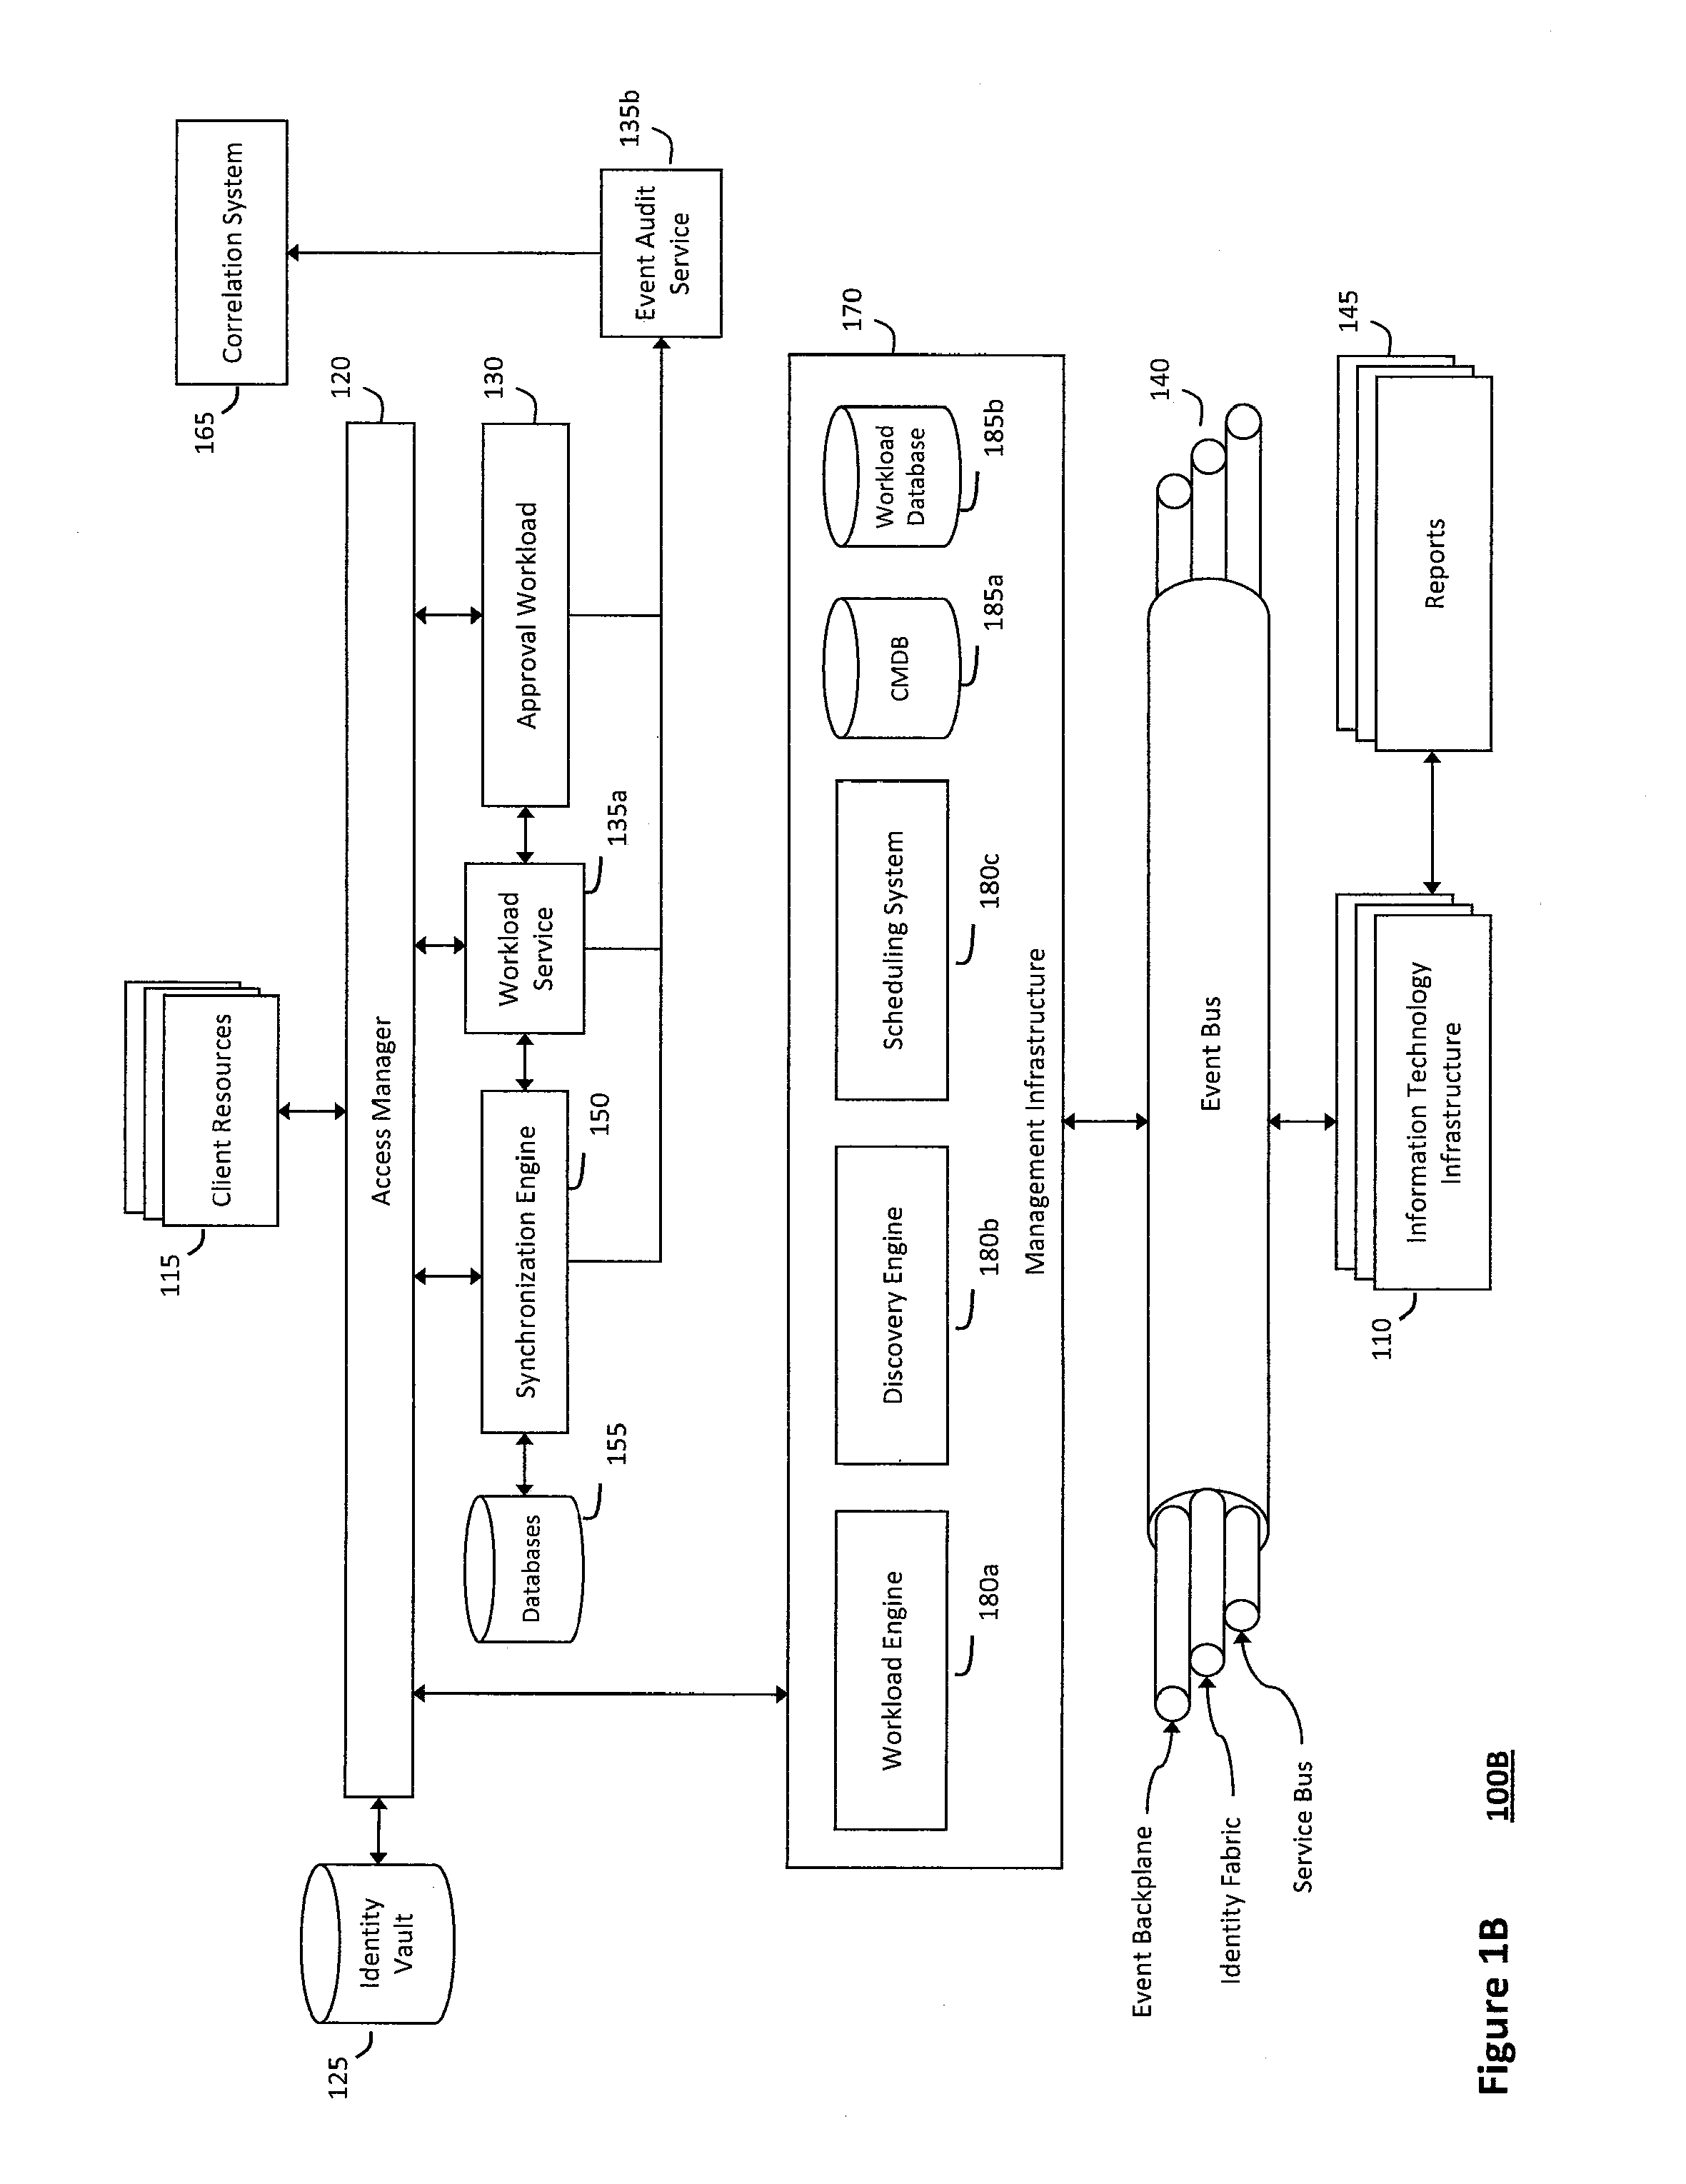 System and method for determining fuzzy cause and effect relationships in an intelligent workload management system